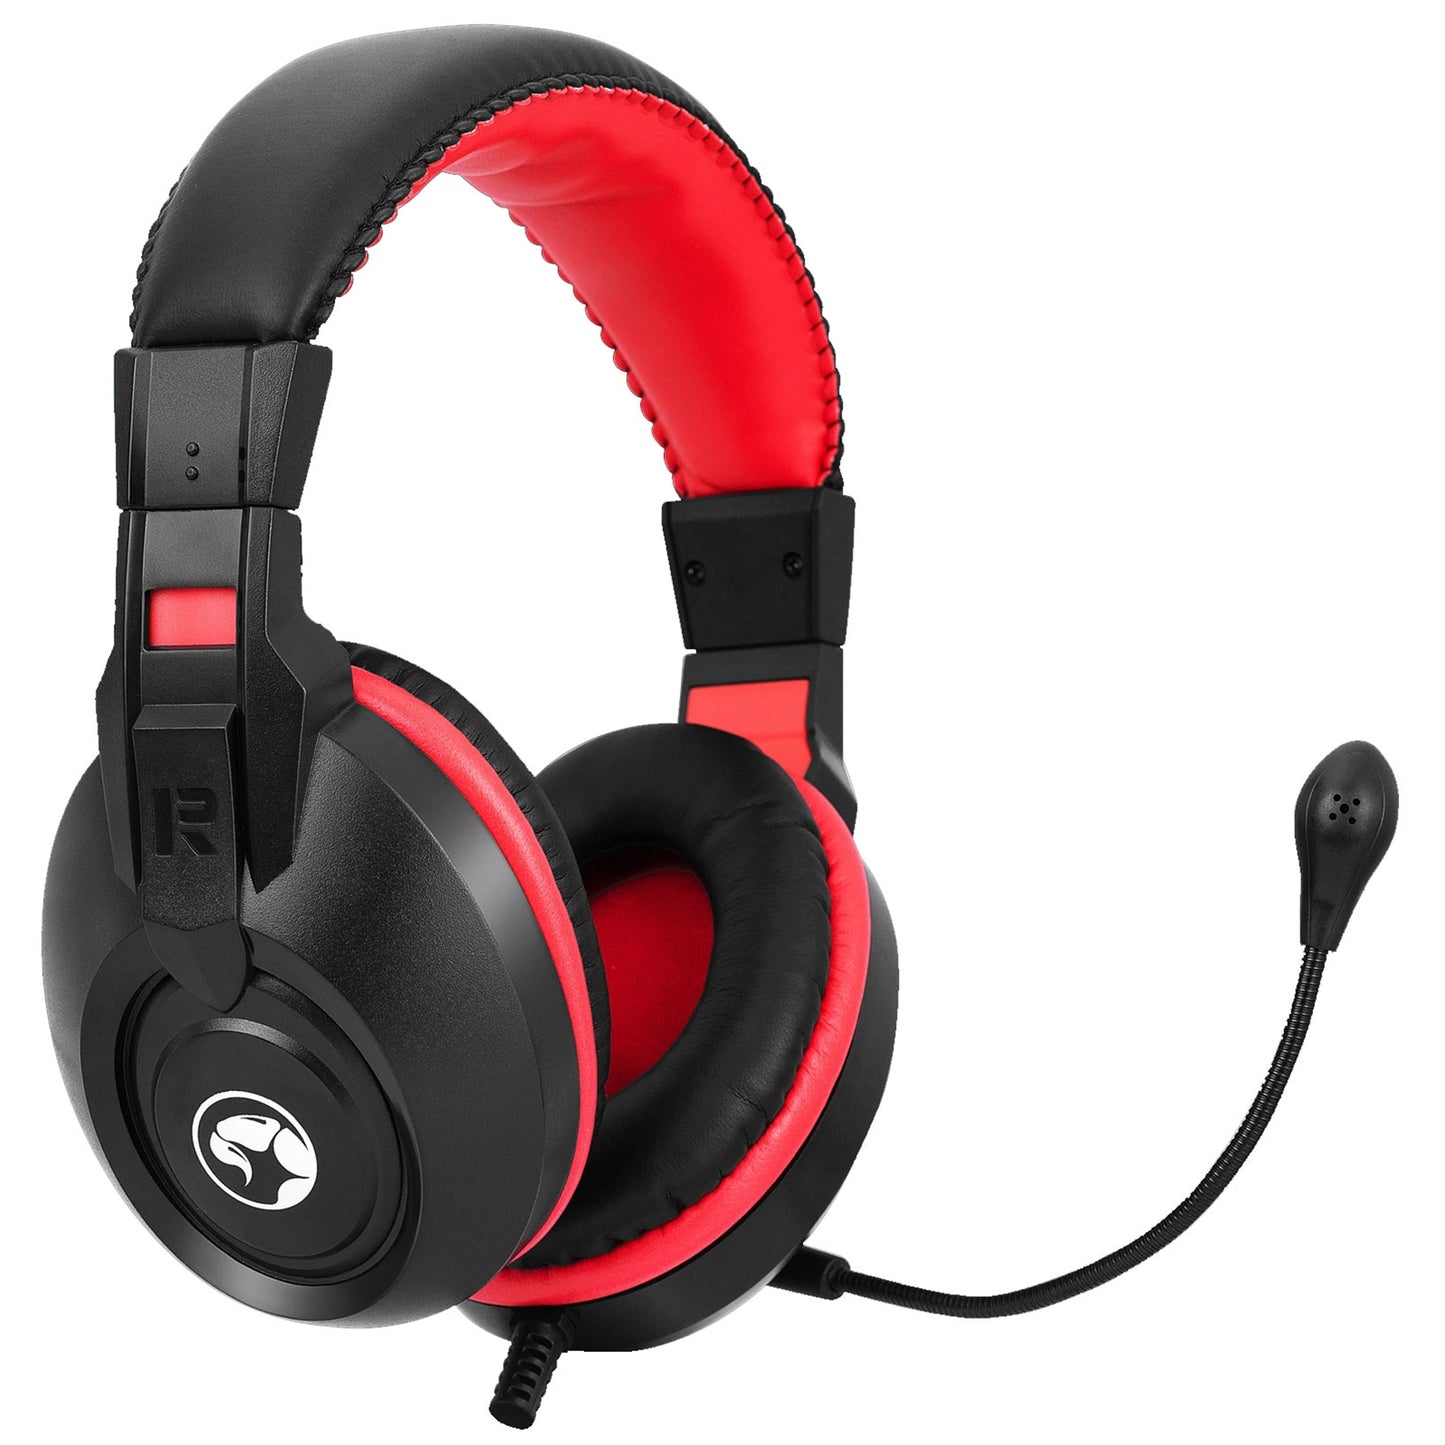 Marvo Scorpion H8321S Stereo Sound Wired Gaming Headset With Microphone, Black And Red